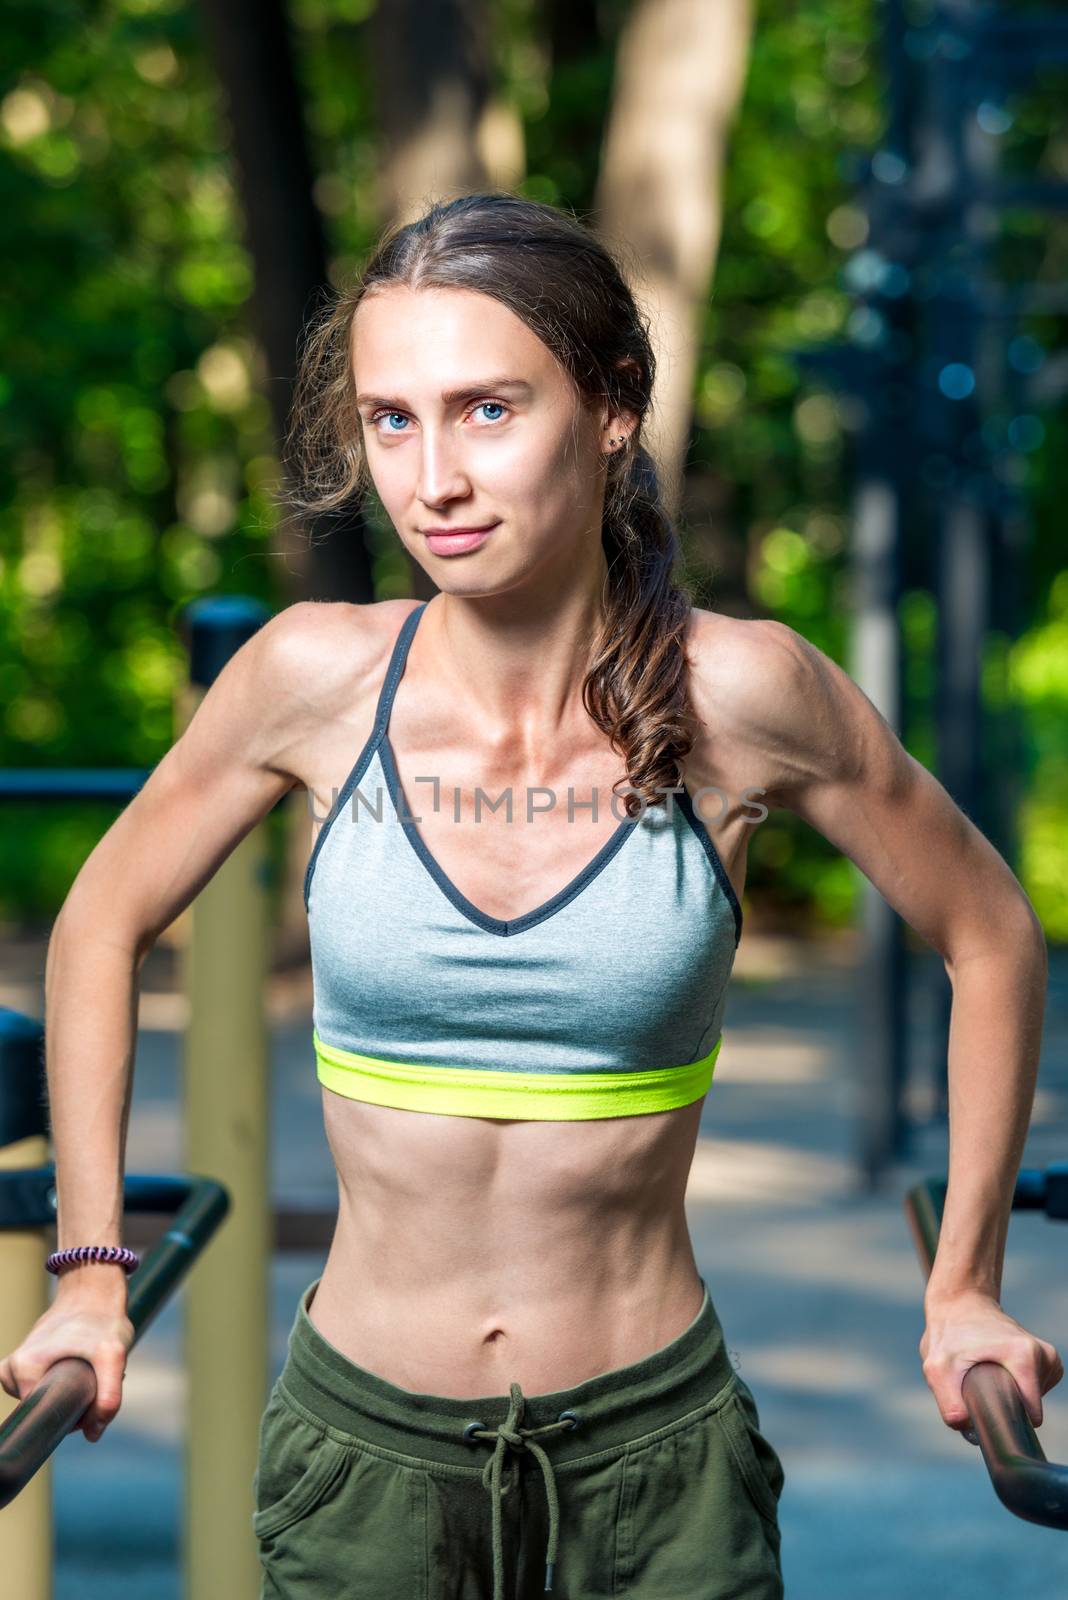 vertical portrait of a muscular woman posing at the gym in the park during a workout